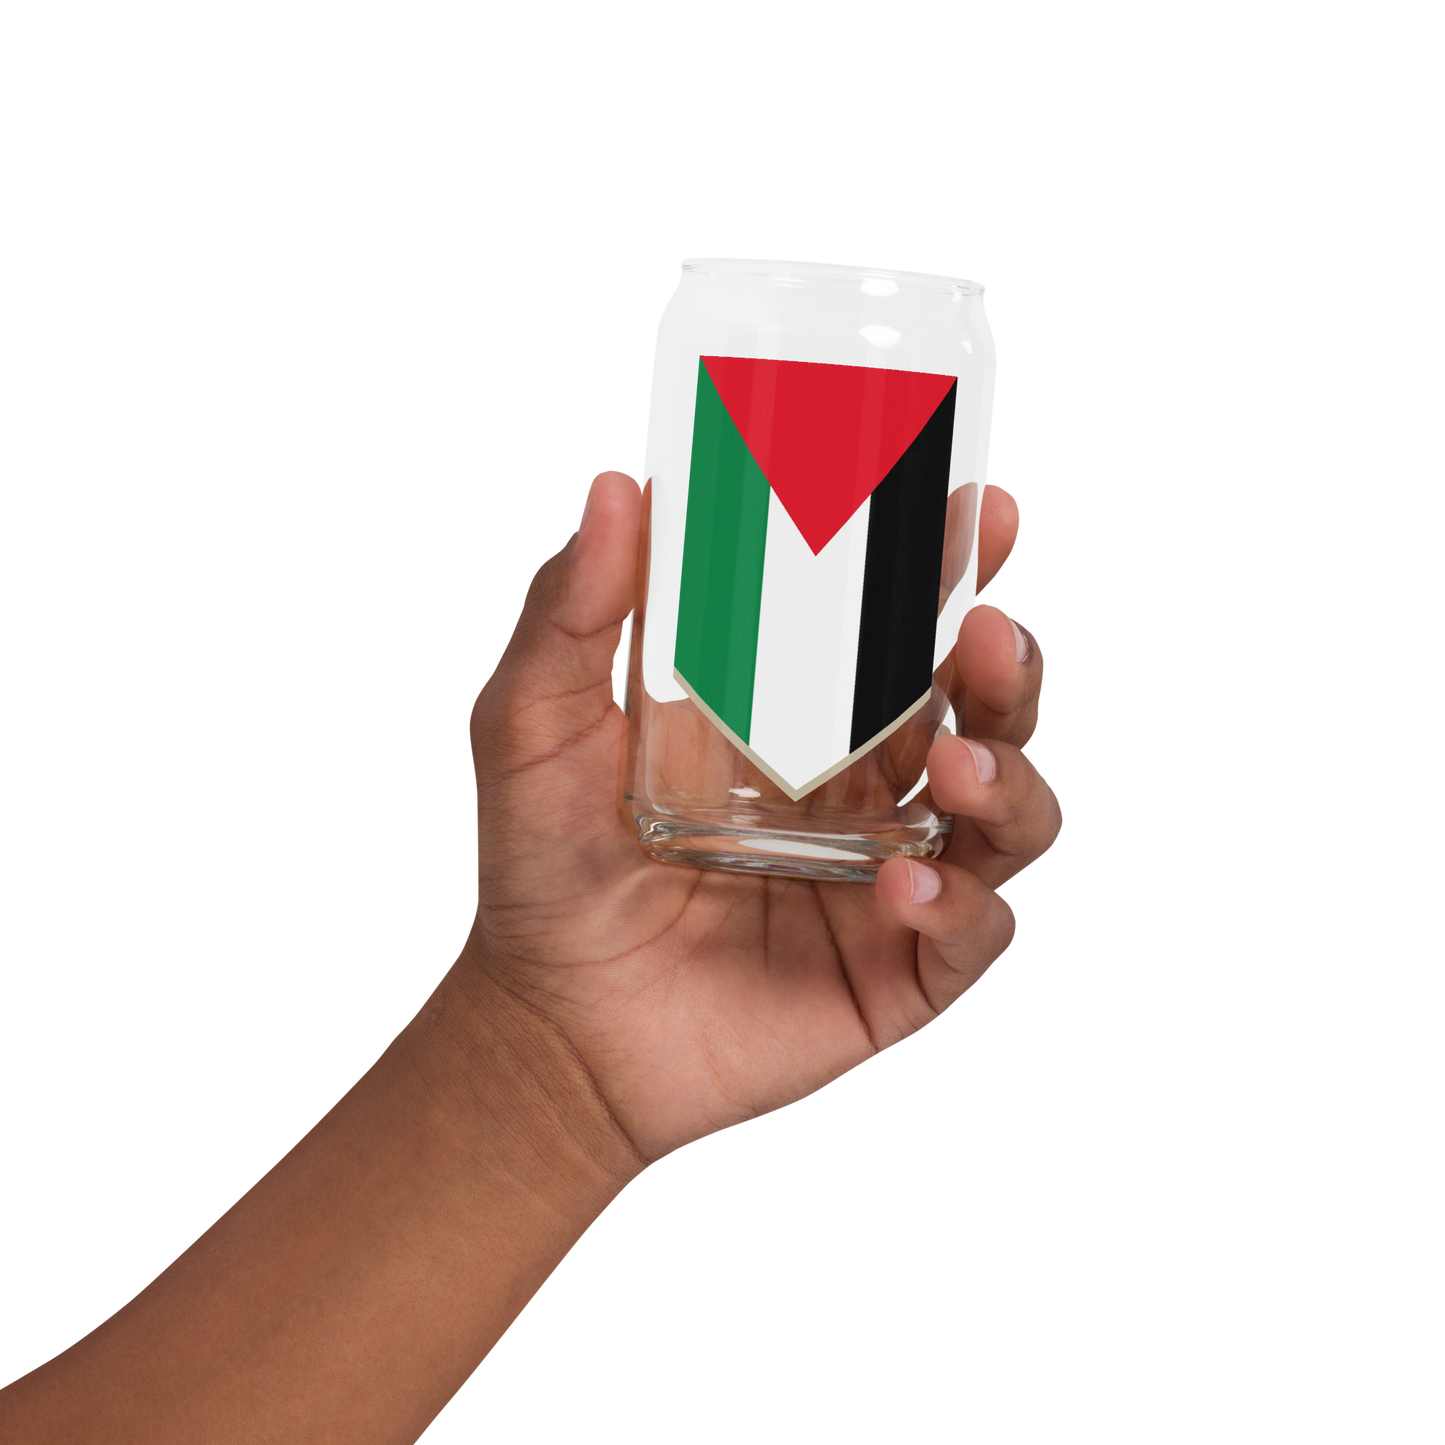 CAN Shaped Glass - PALESTINE